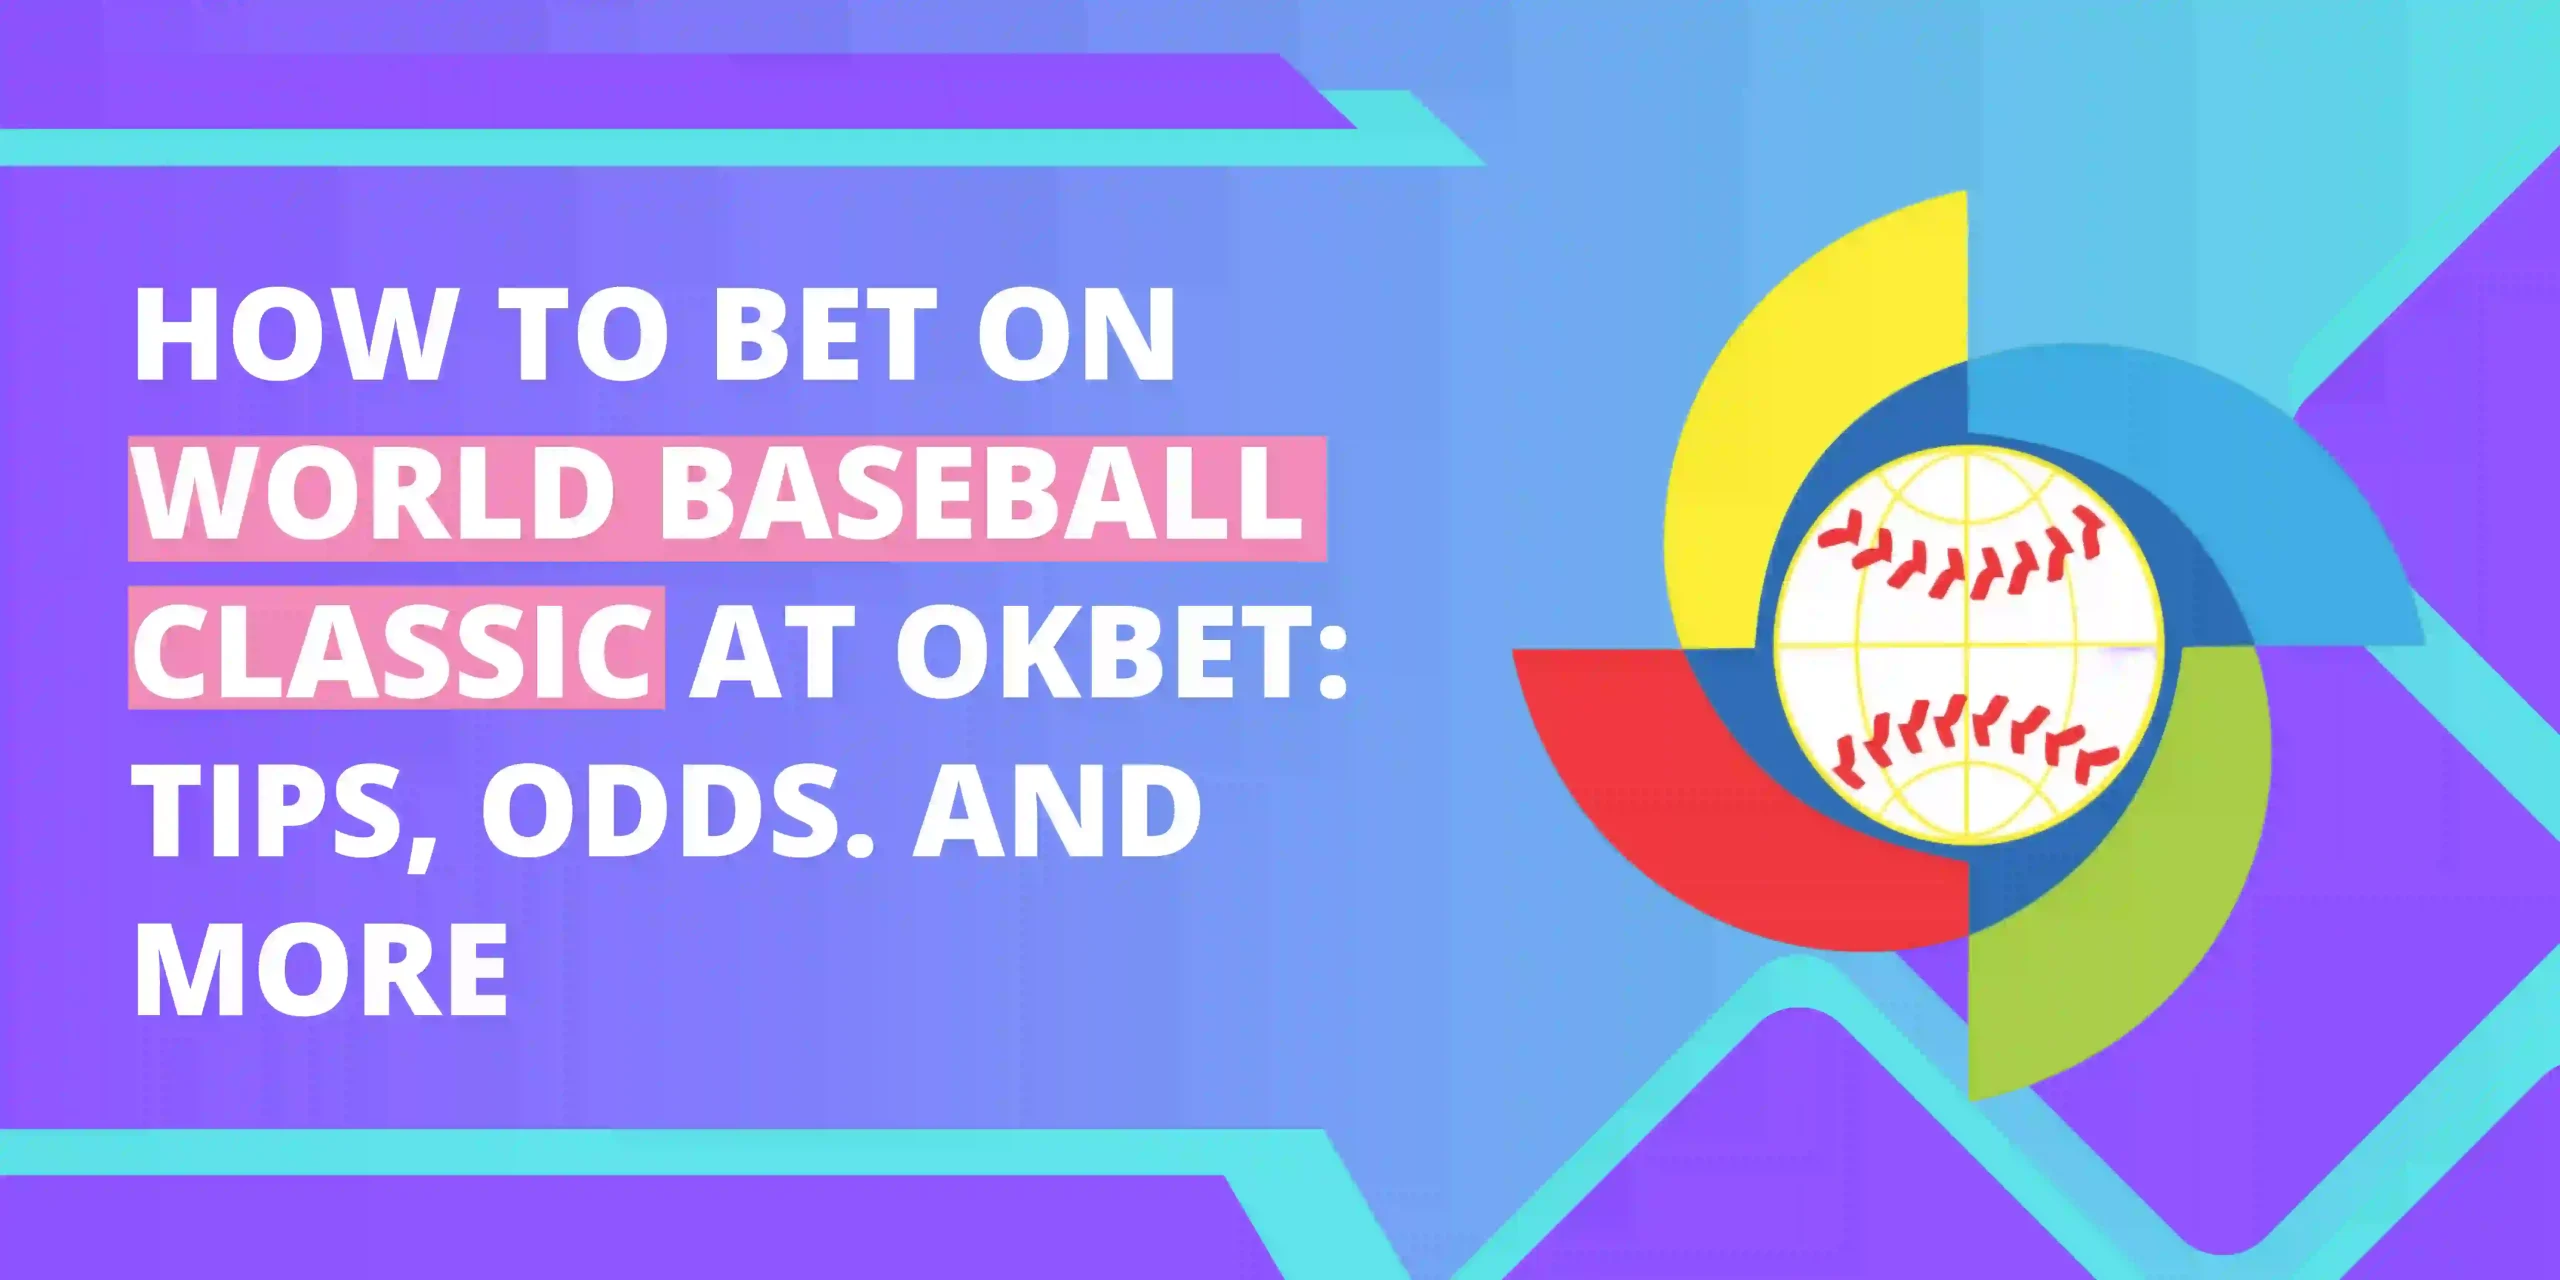 How to Bet on World Baseball Classic at OKBet: Tips, Odds, and More